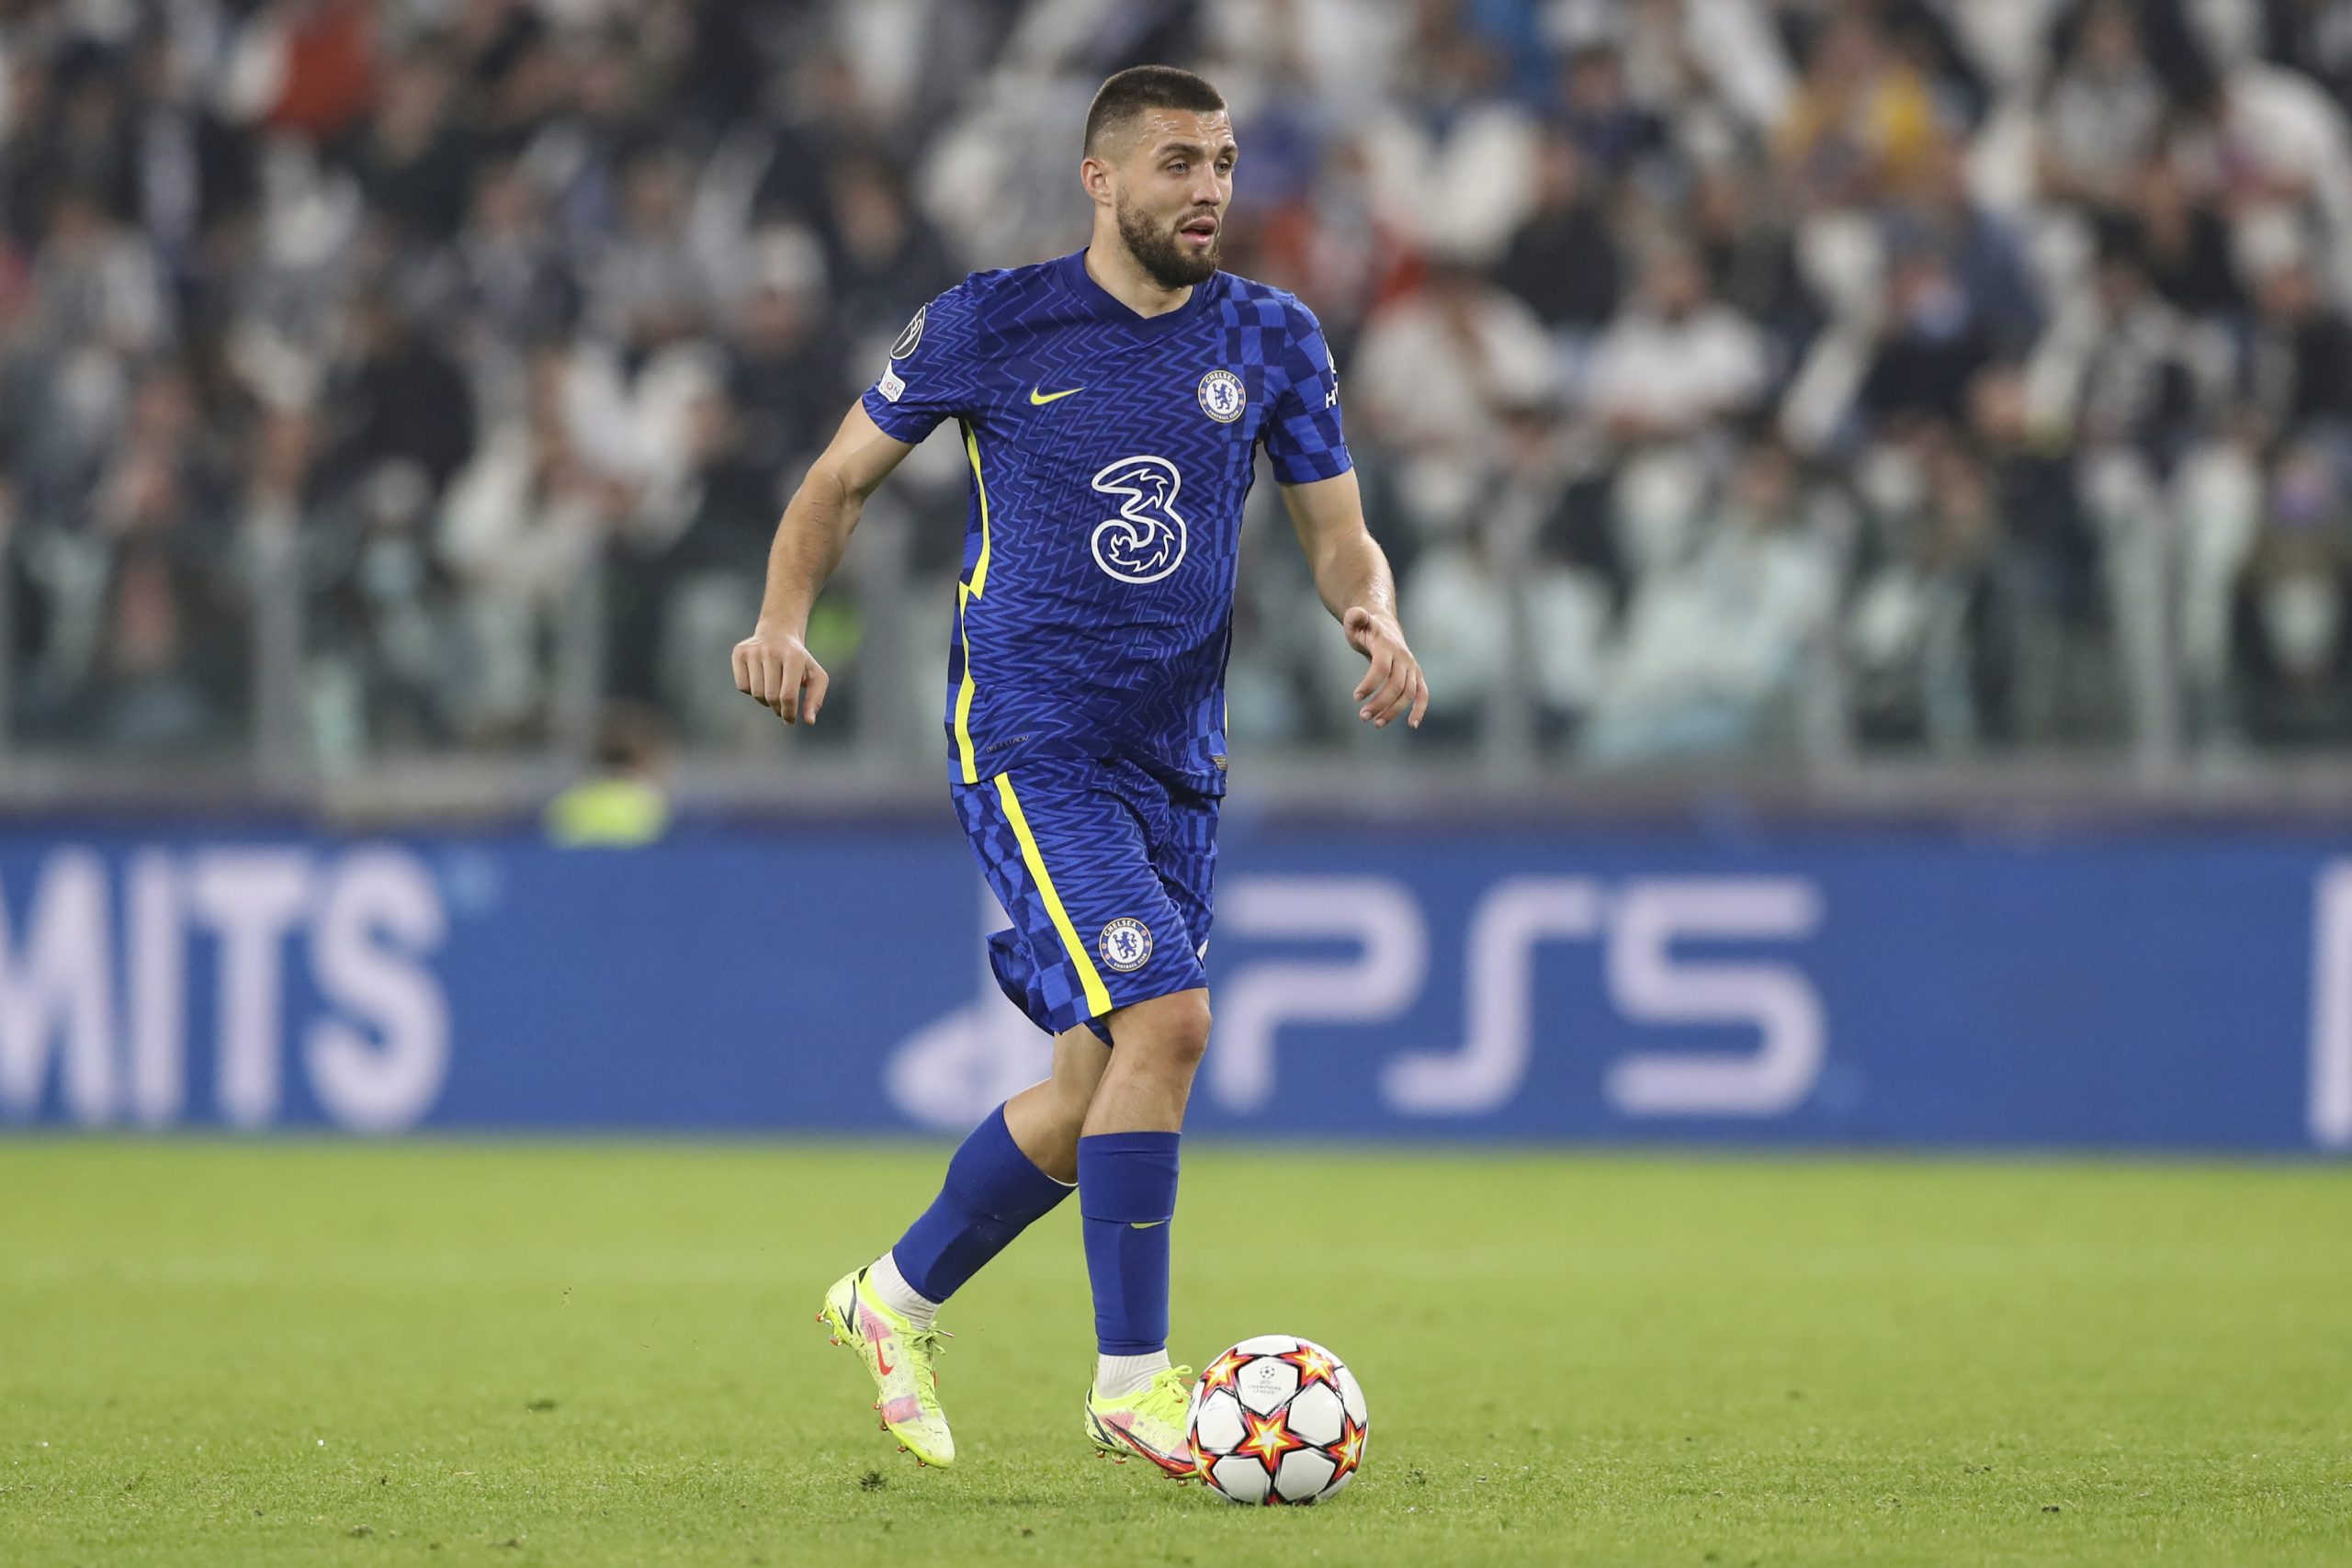 September 29, 2021, Turin, United Kingdom: Turin, Italy, 29th September 2021. Mateo Kovacic of Chelsea FC during the UEFA Champions League match at Allianz Stadium, Turin. Picture credit should read: Jonathan Moscrop / Sportimage(Credit Image: © Jonathan Moscrop/CSM via ZUMA Wire) (Cal Sport Media via AP Images)